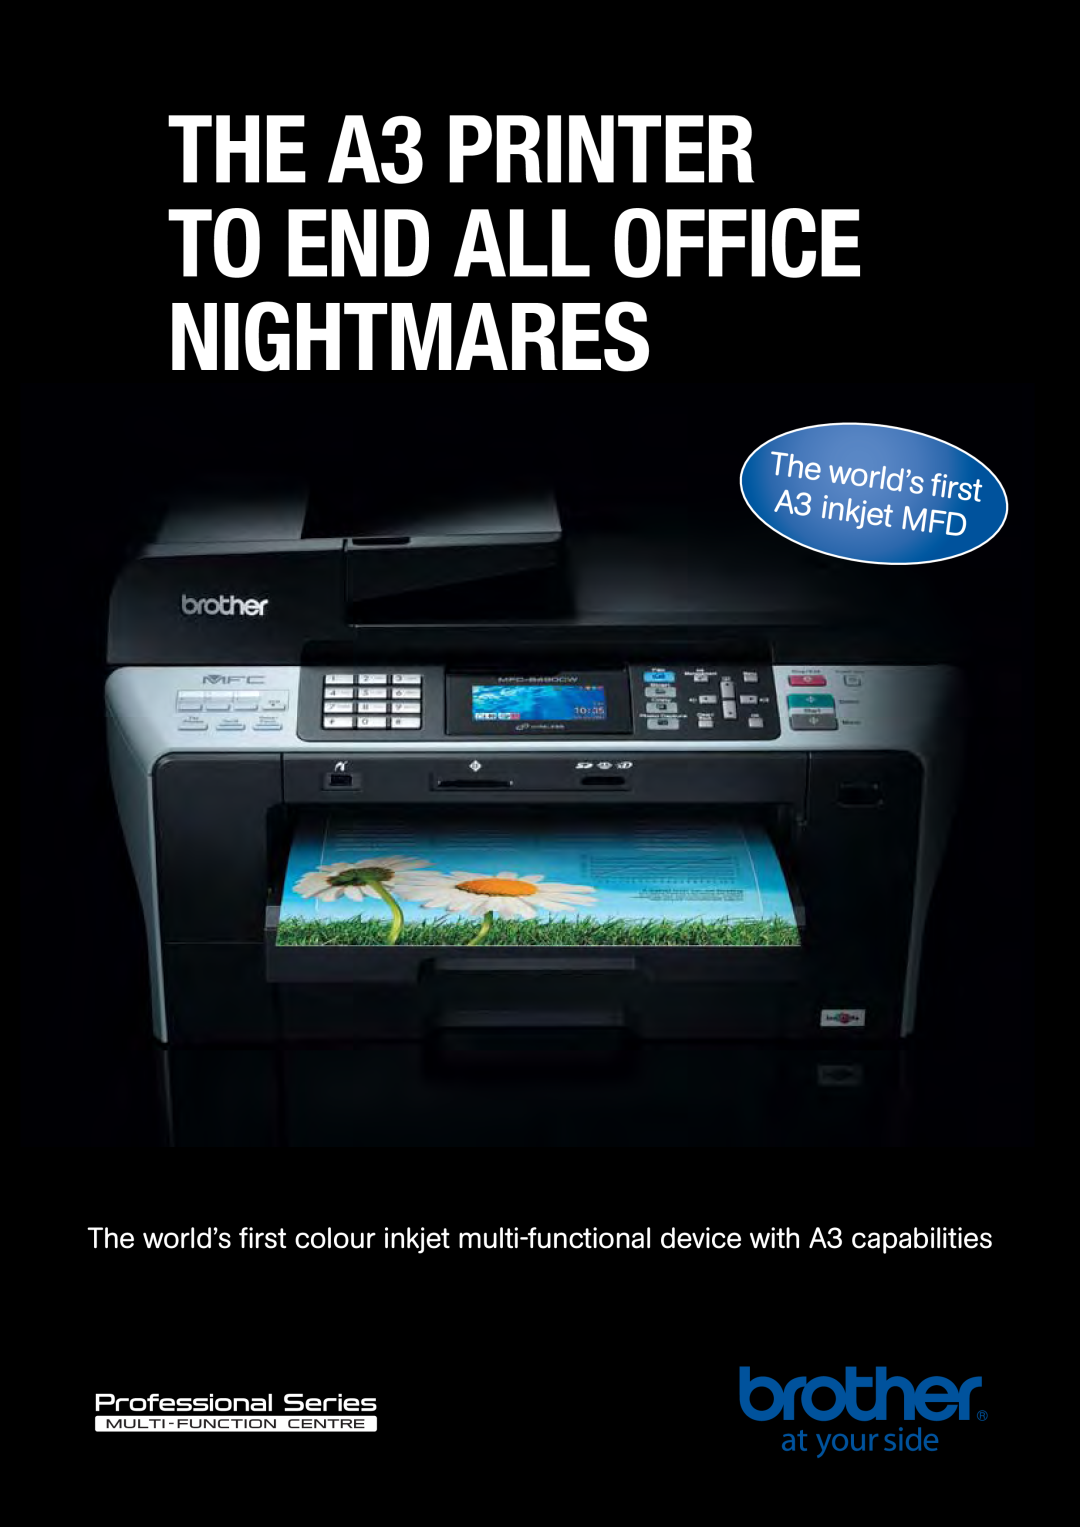 Brother A4 manual The world’s first A3 inkjet MFD, The A3 printer to end all office nightmares 